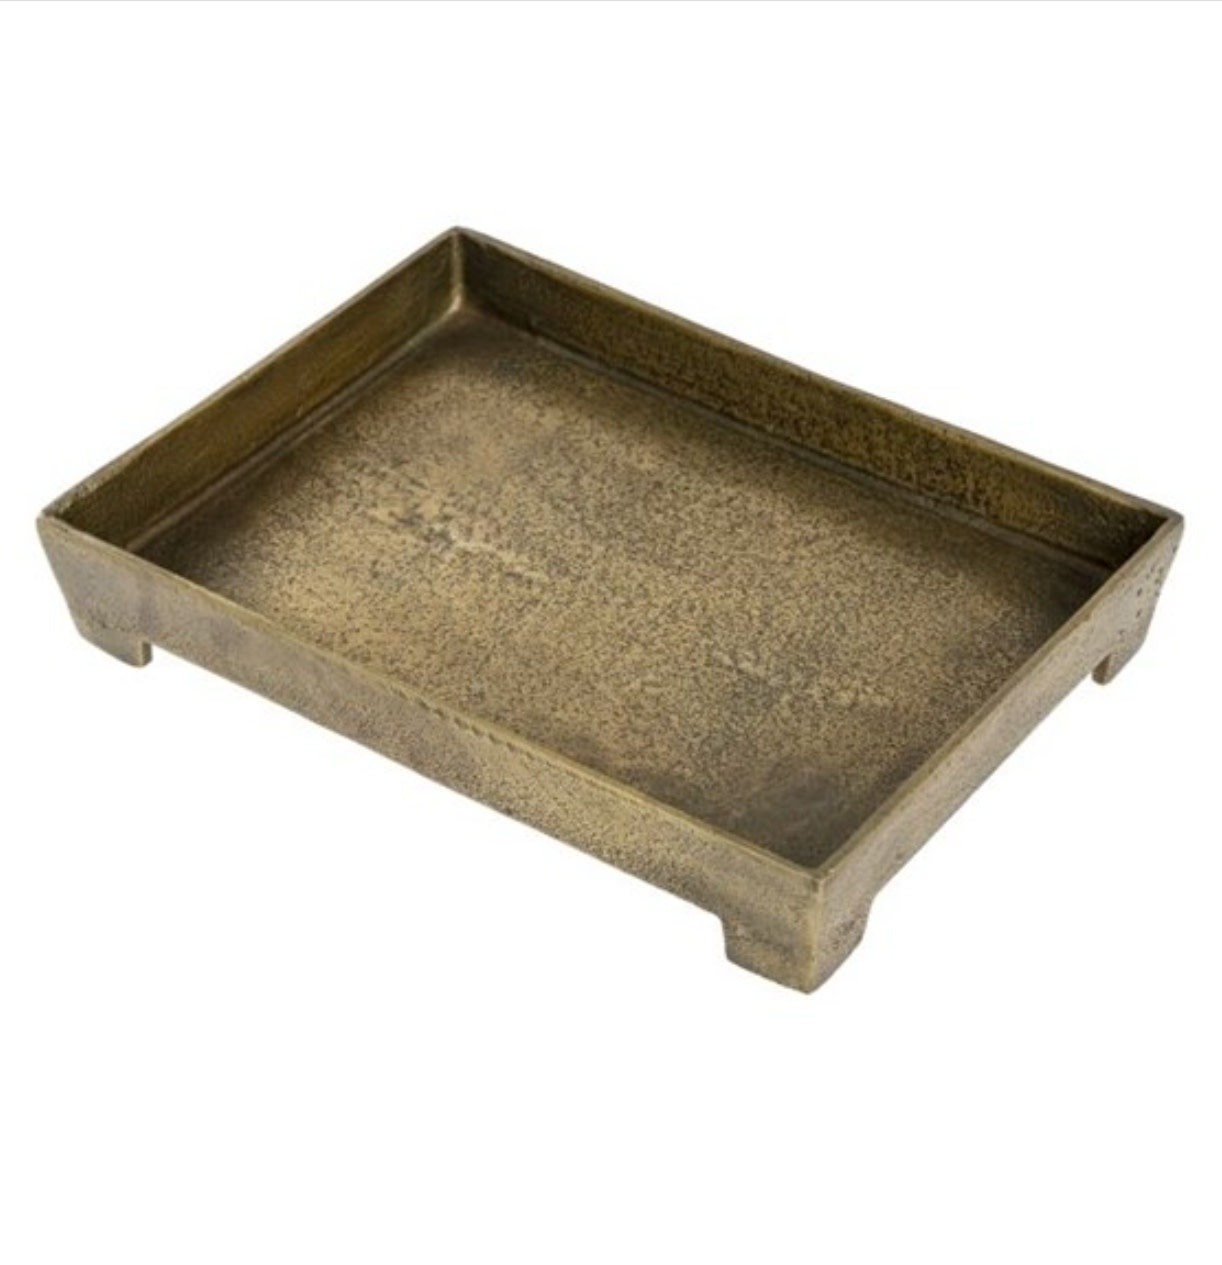 Footed Coffee Bronze Table Tray, Small, 11.5x8.25x2